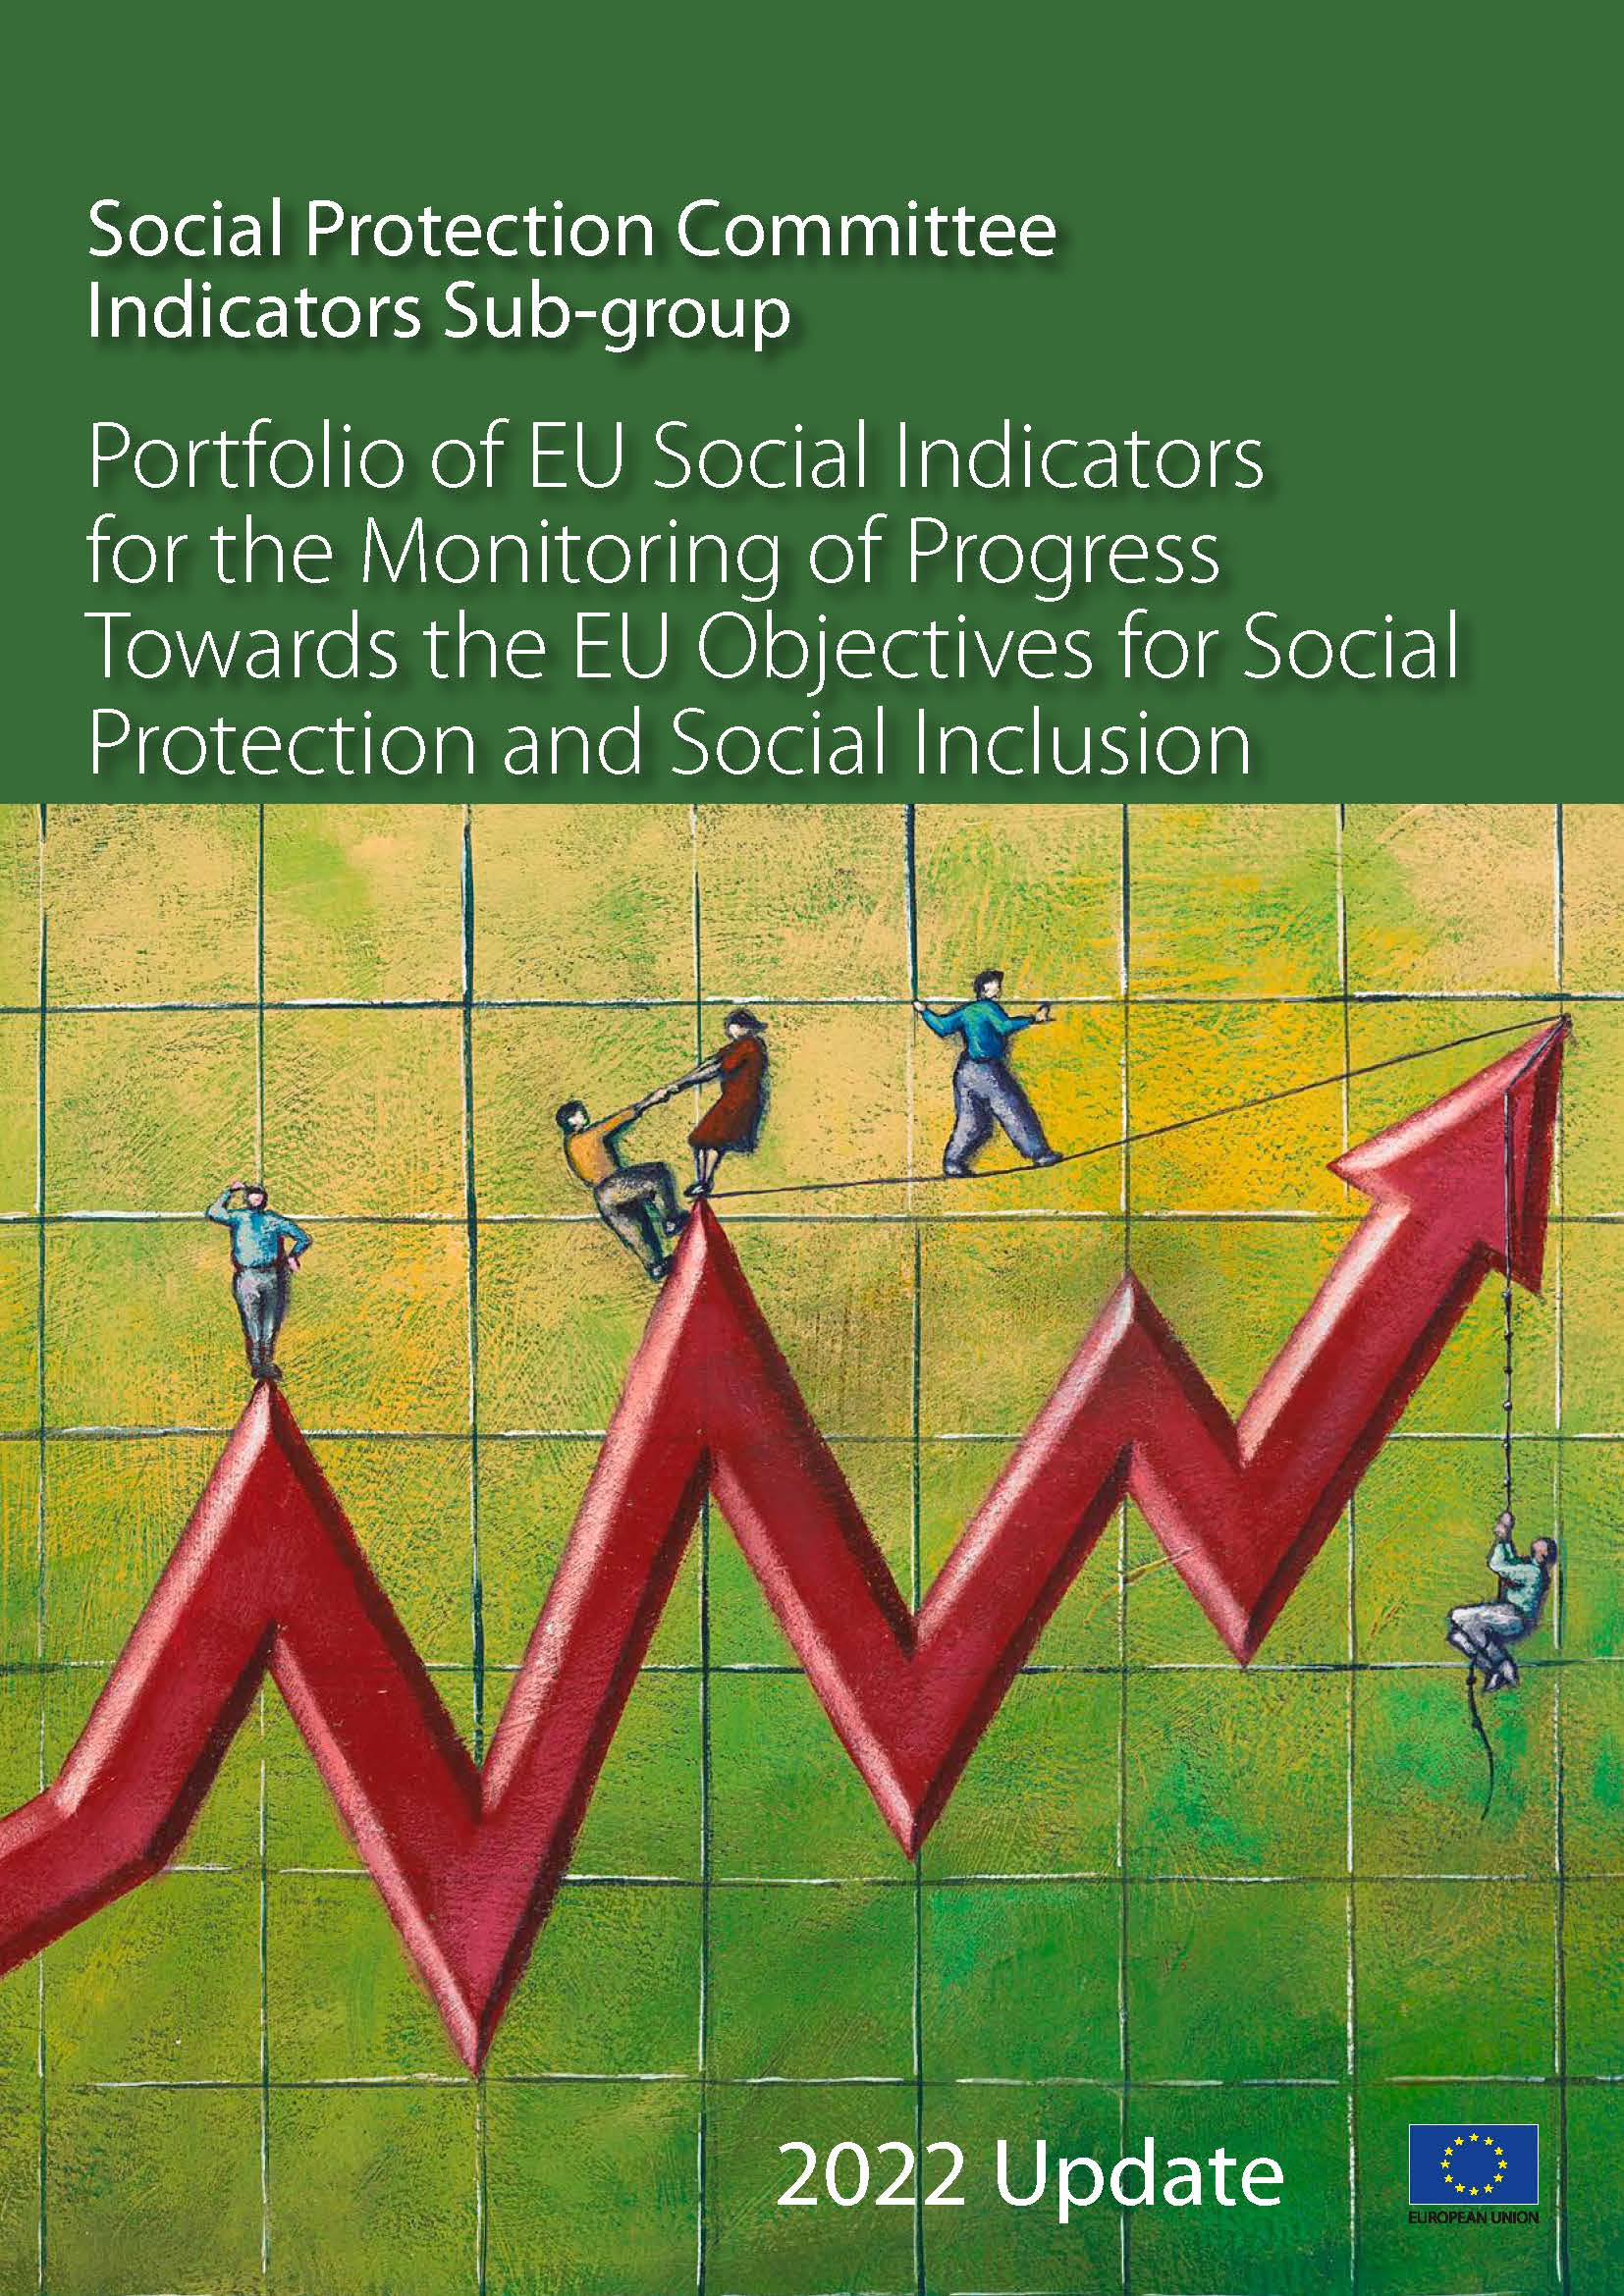 Portfolio of EU social indicators for the monitoring of progress towards the EU objectives for Social Protection and Social Inclusion (2022 update)